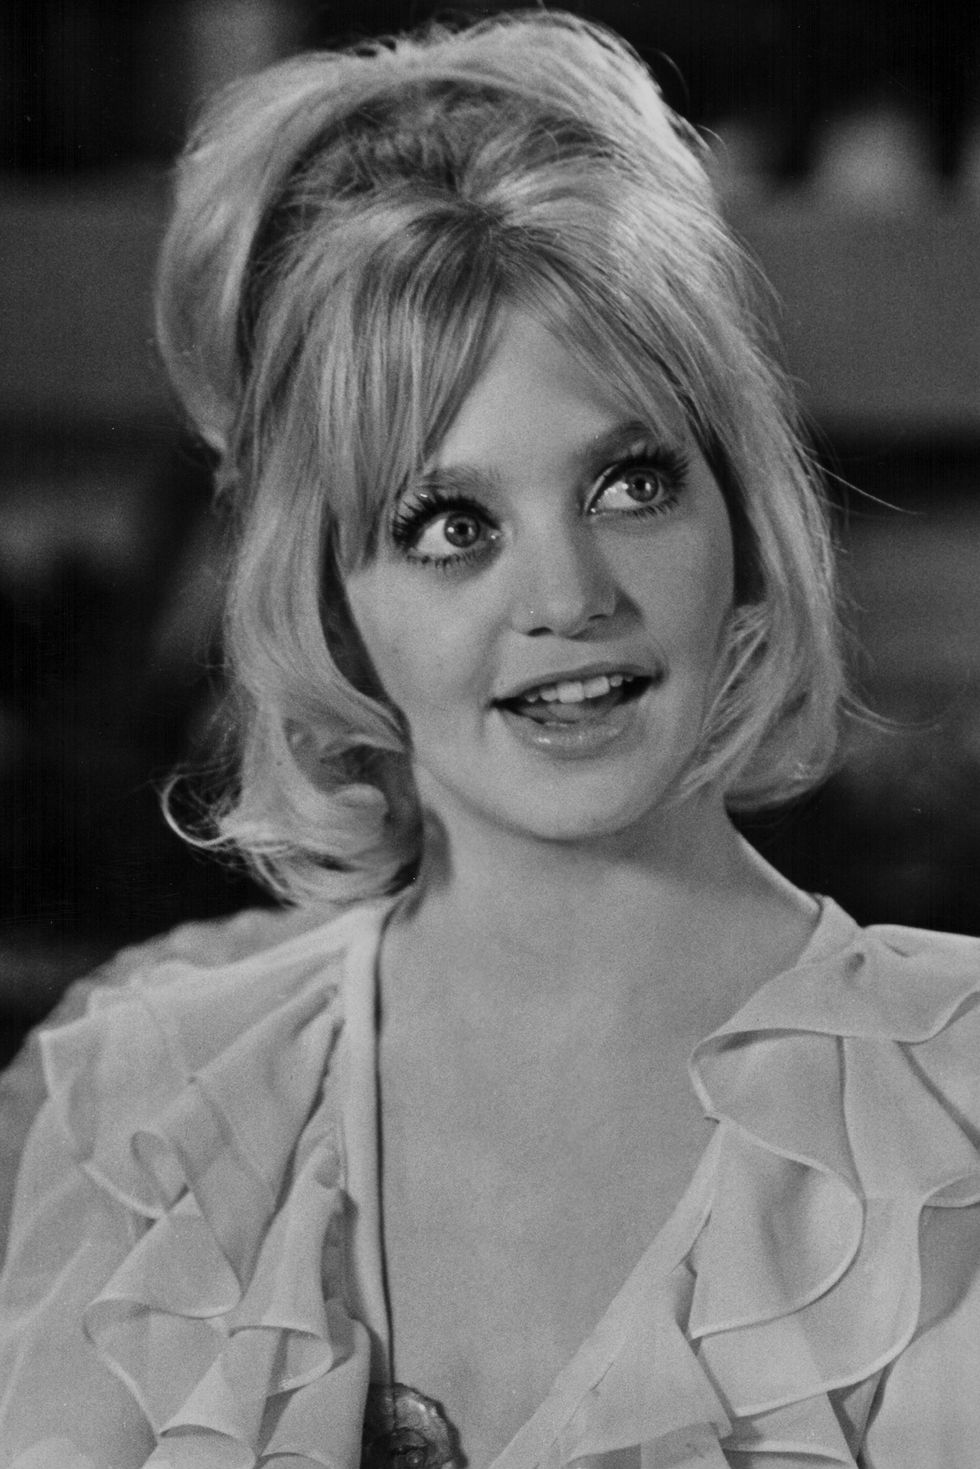 portrait of actress goldie hawn, 1975 photo by authenticated newsmoviepixgetty images